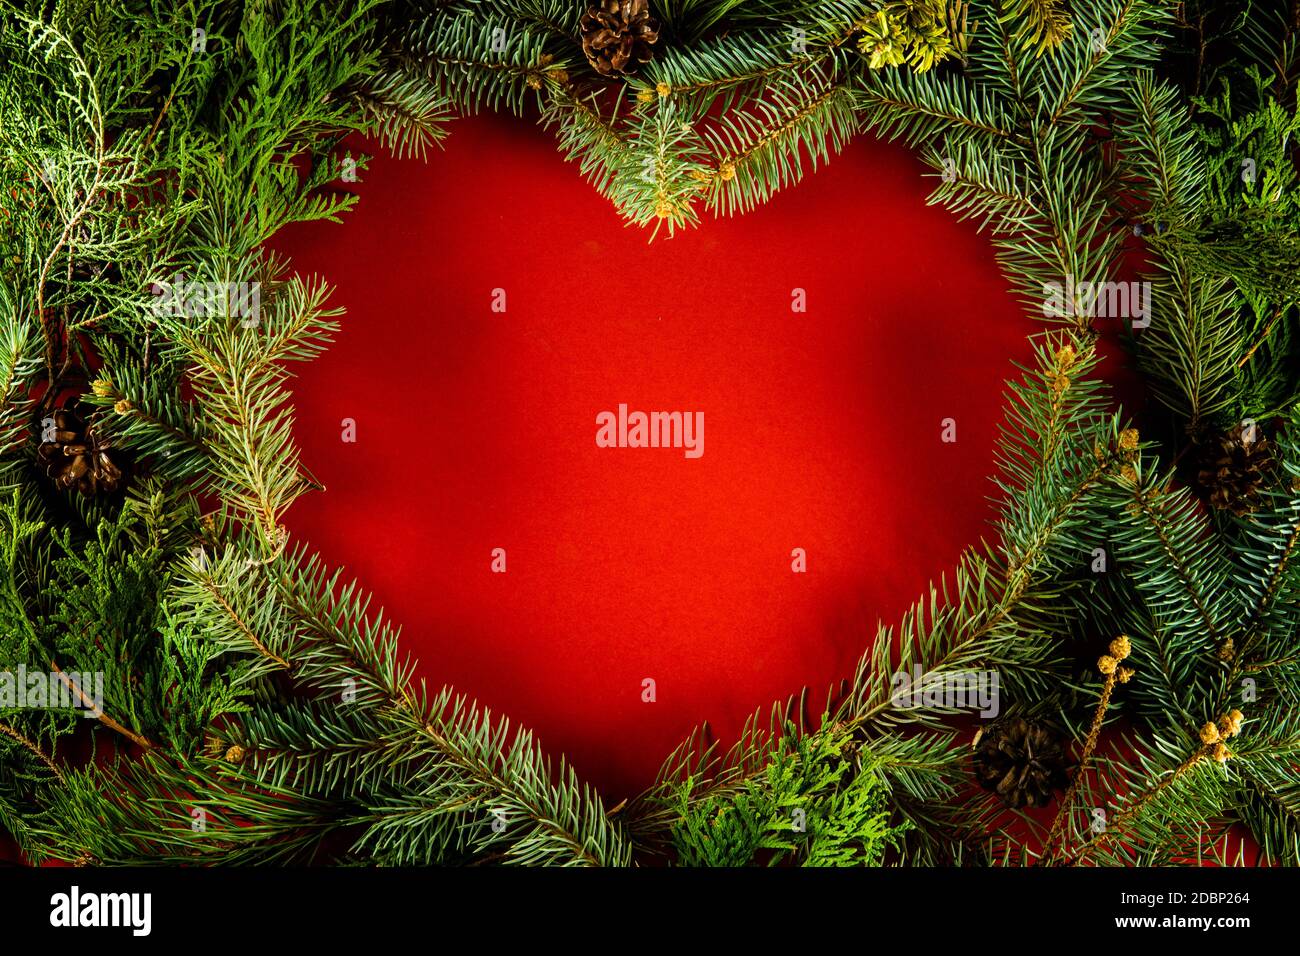 Creative layout with heart shaped Christmas branches. Nature Christmas background Stock Photo